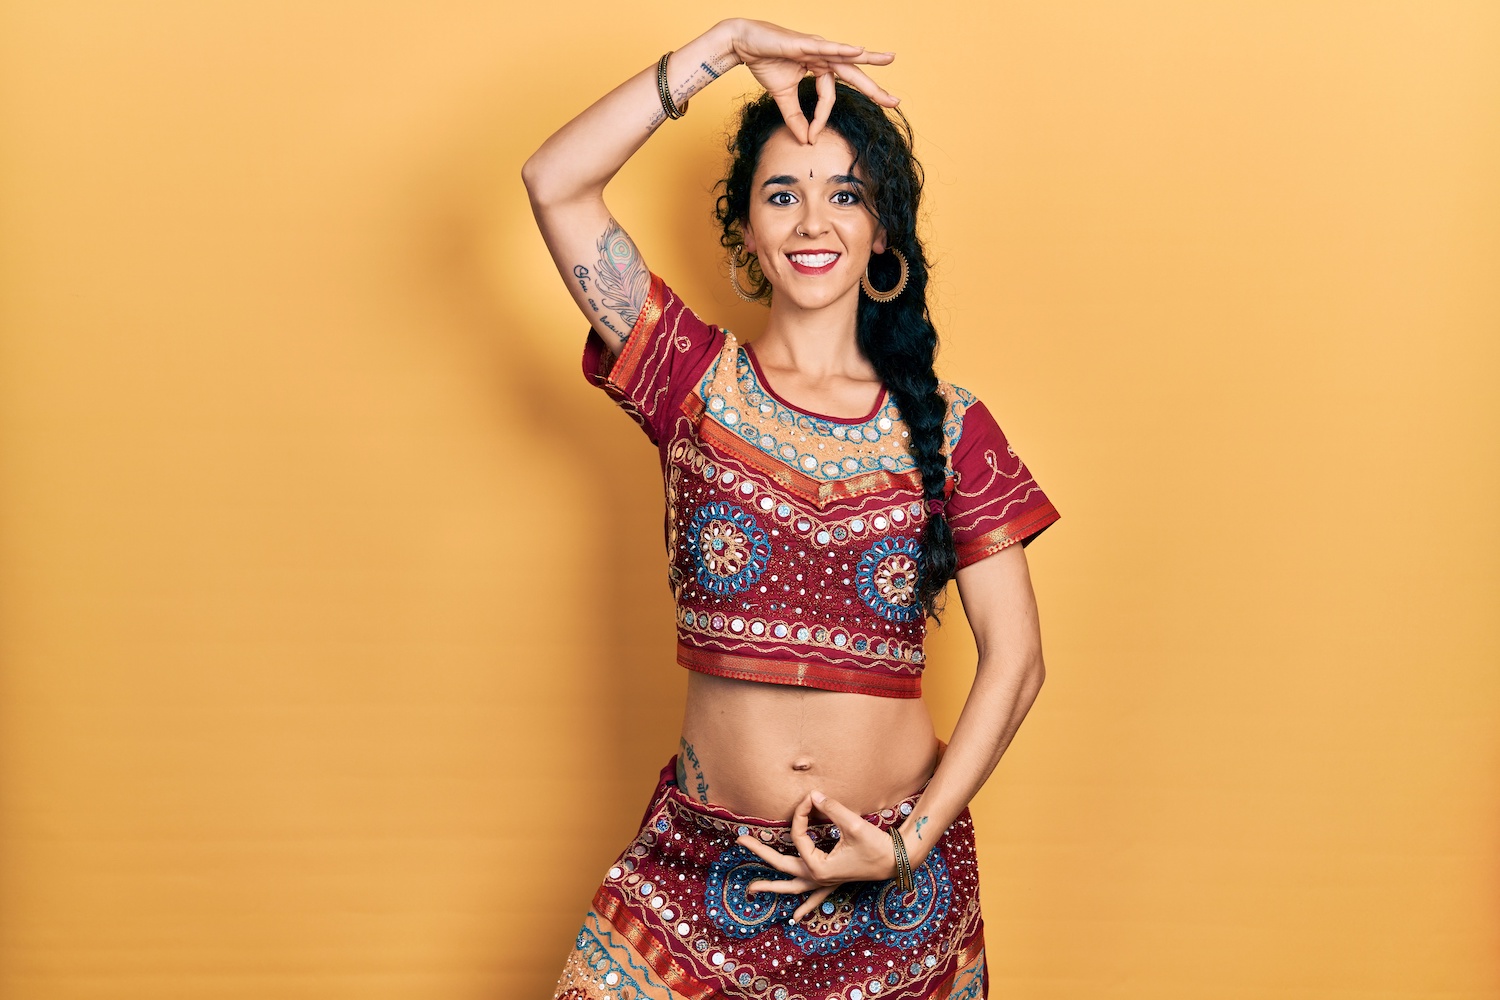 What do belly dancers wear?